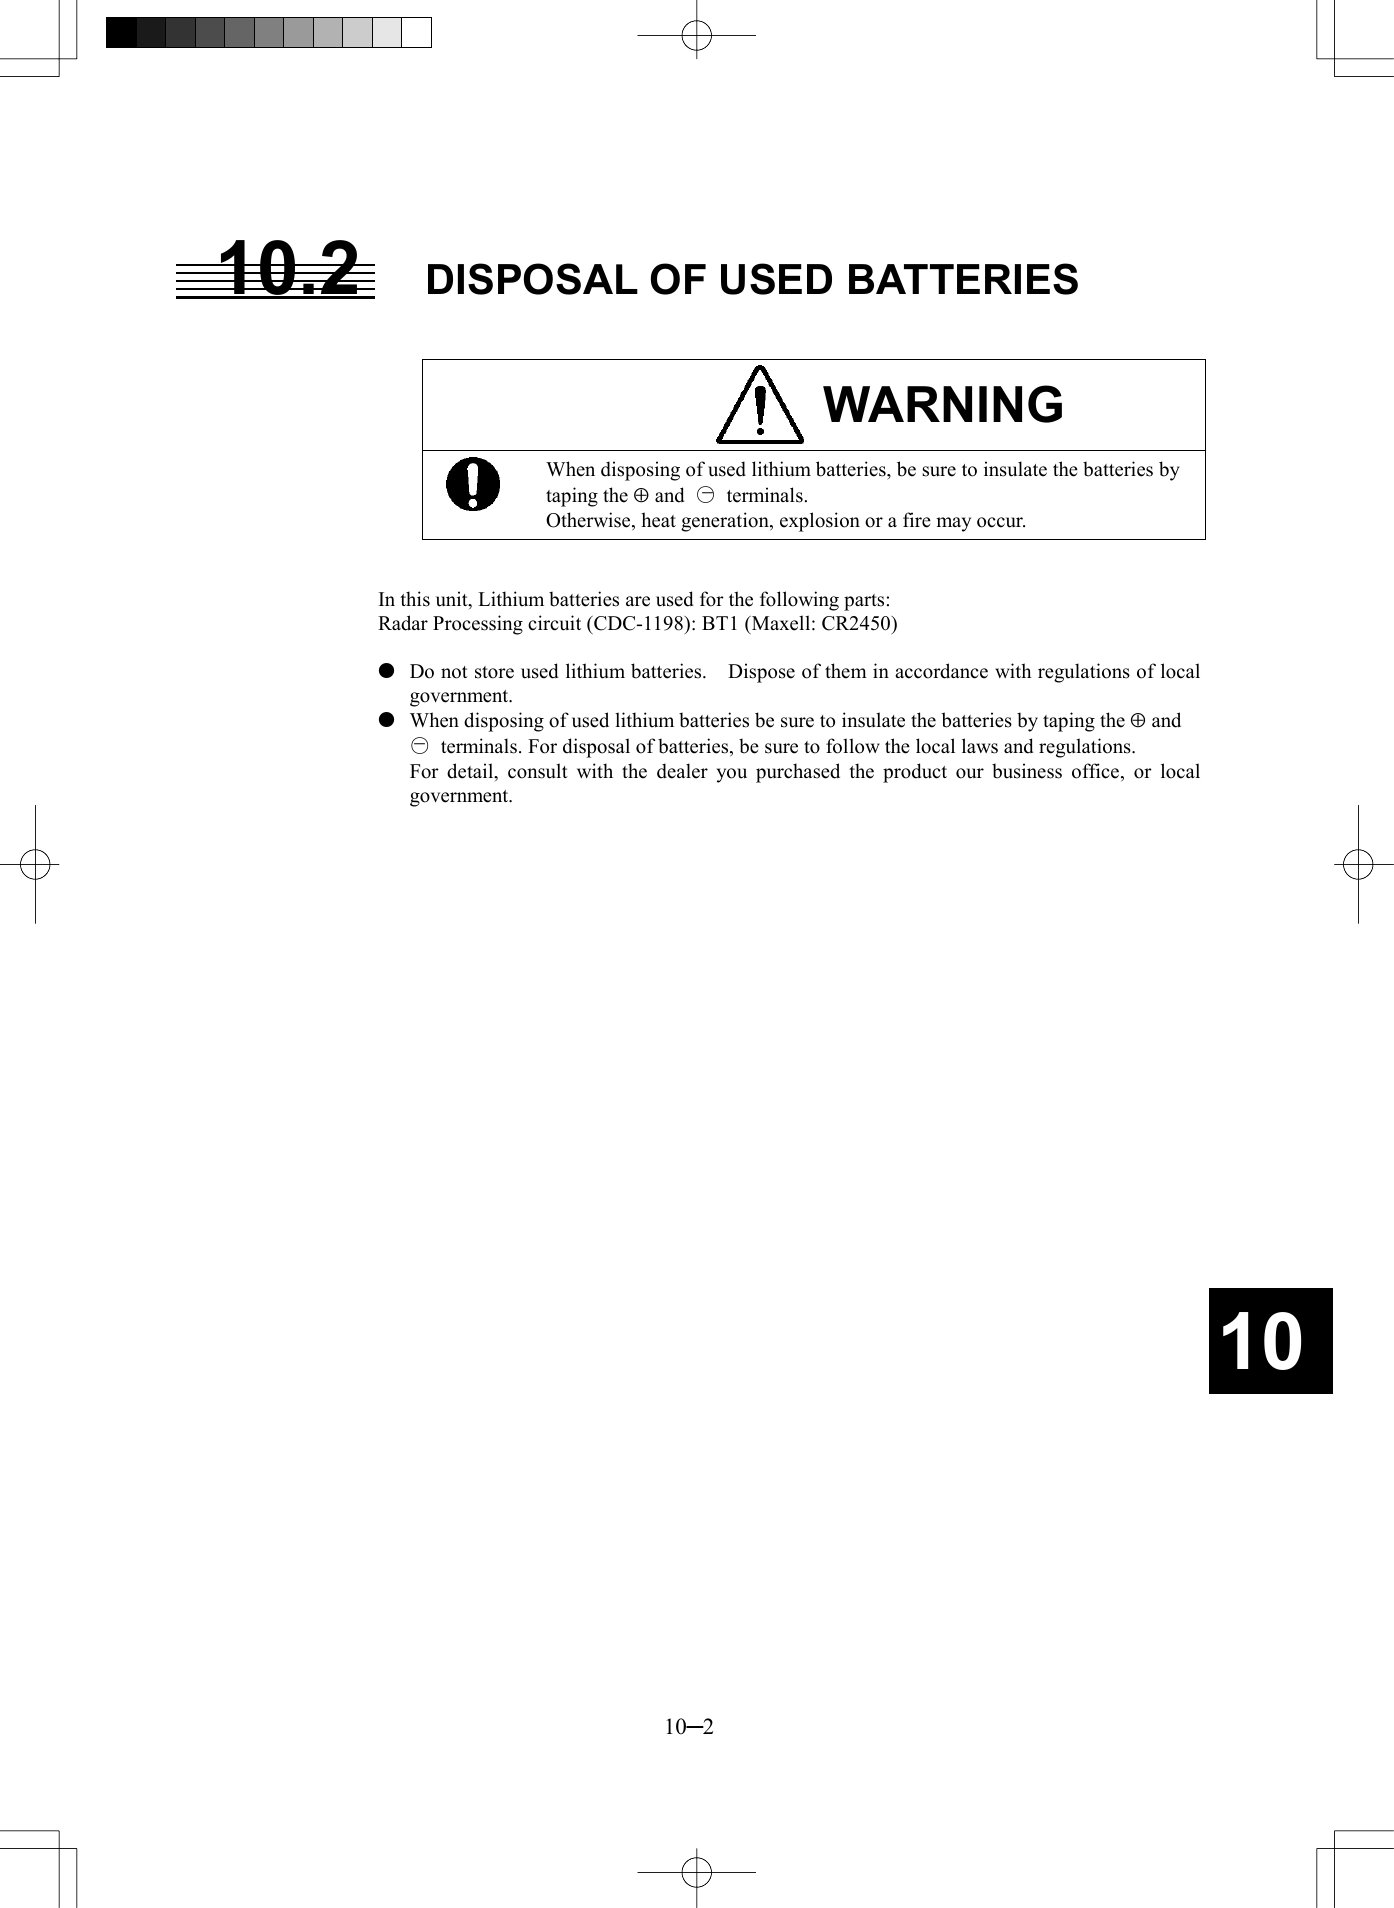   10─2 1010.2  DISPOSAL OF USED BATTERIES   WARNING  When disposing of used lithium batteries, be sure to insulate the batteries by taping the Å and  ○ terminals. Otherwise, heat generation, explosion or a fire may occur.   In this unit, Lithium batteries are used for the following parts: Radar Processing circuit (CDC-1198): BT1 (Maxell: CR2450)    Do not store used lithium batteries.    Dispose of them in accordance with regulations of local government.   When disposing of used lithium batteries be sure to insulate the batteries by taping the Å and   ○  terminals. For disposal of batteries, be sure to follow the local laws and regulations.   For detail, consult with the dealer you purchased the product our business office, or local government.    -- 